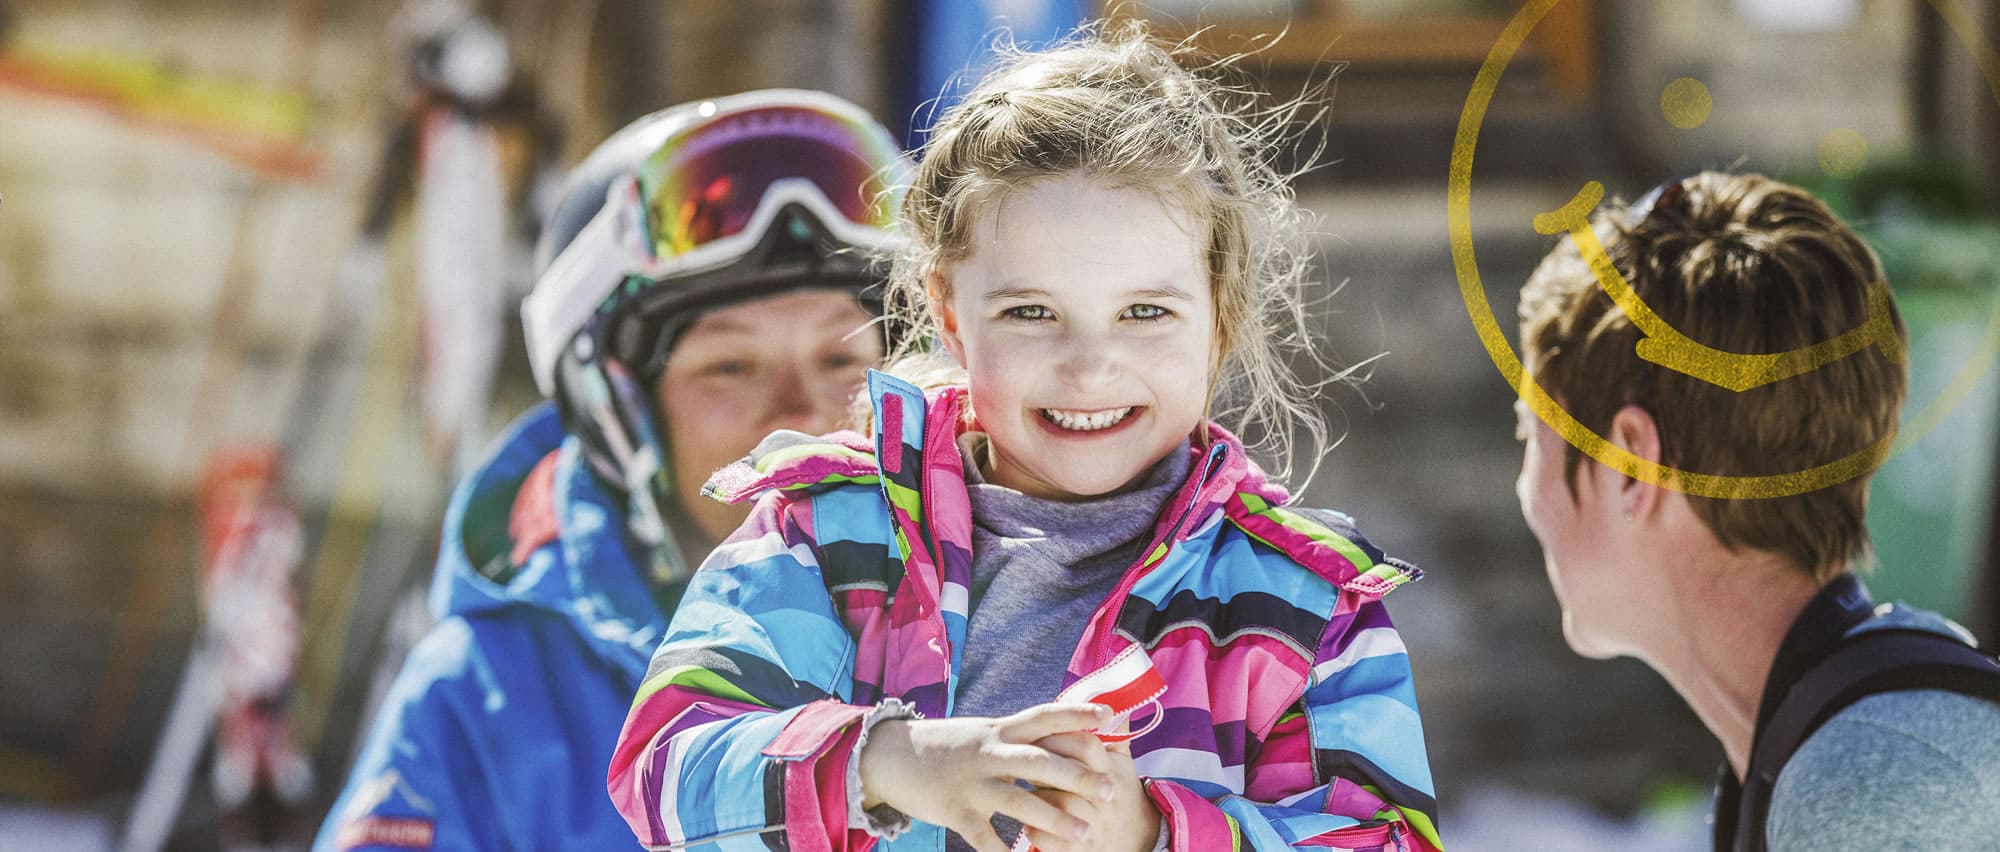 Children’s skiing courses in Salzburger Land